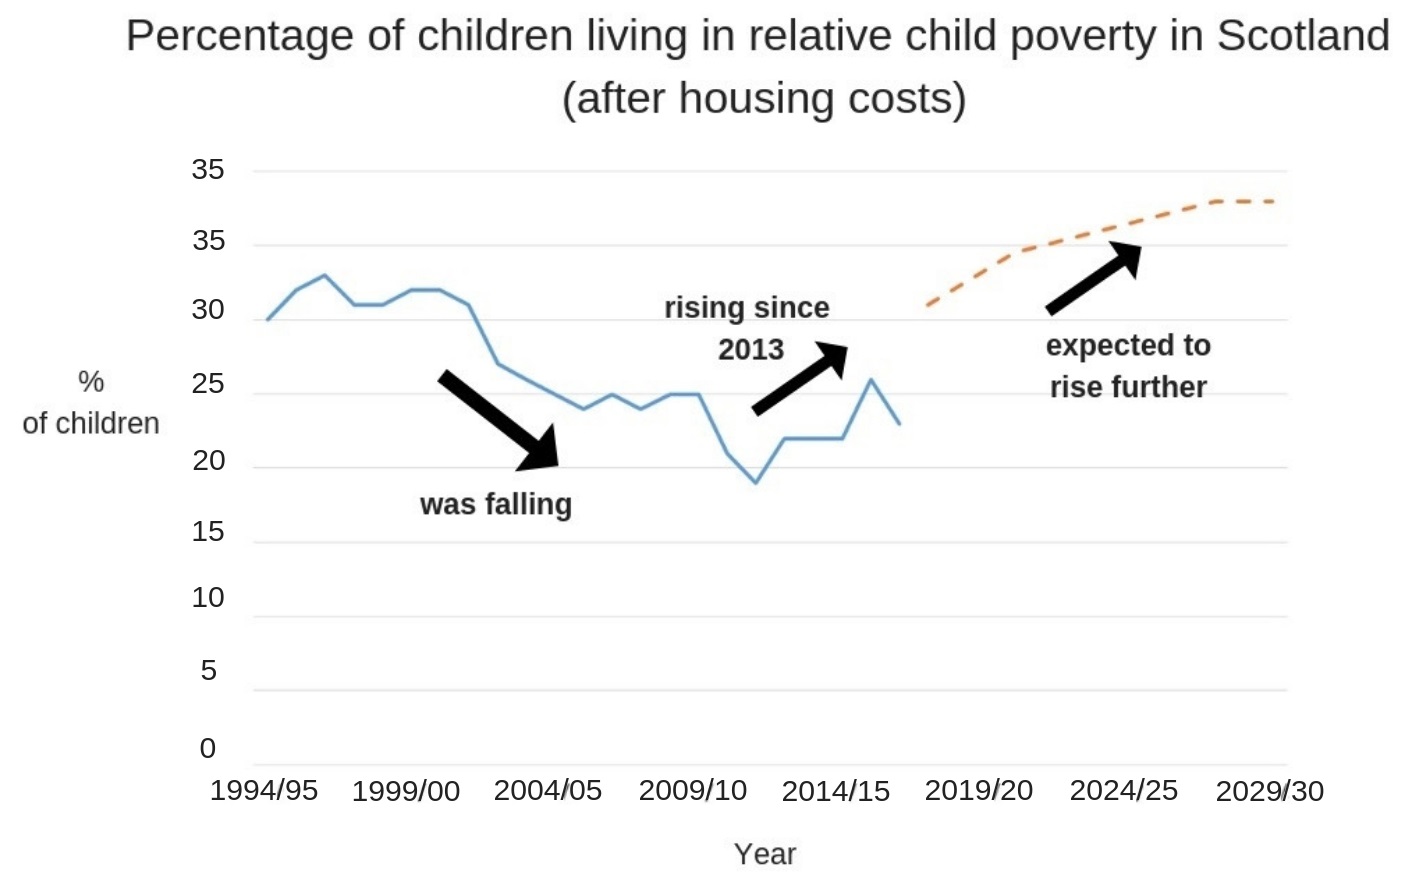 Trends in relative child poverty since 1994/95.

After increasing, levels then fell during the late 1990s and mid-2000s. 
Since 2013 levels have started to increase again.
In 2016/17, just under a quarter of children in Scotland were living in relative poverty.
Child poverty is likely to further increase through until 2029/30.